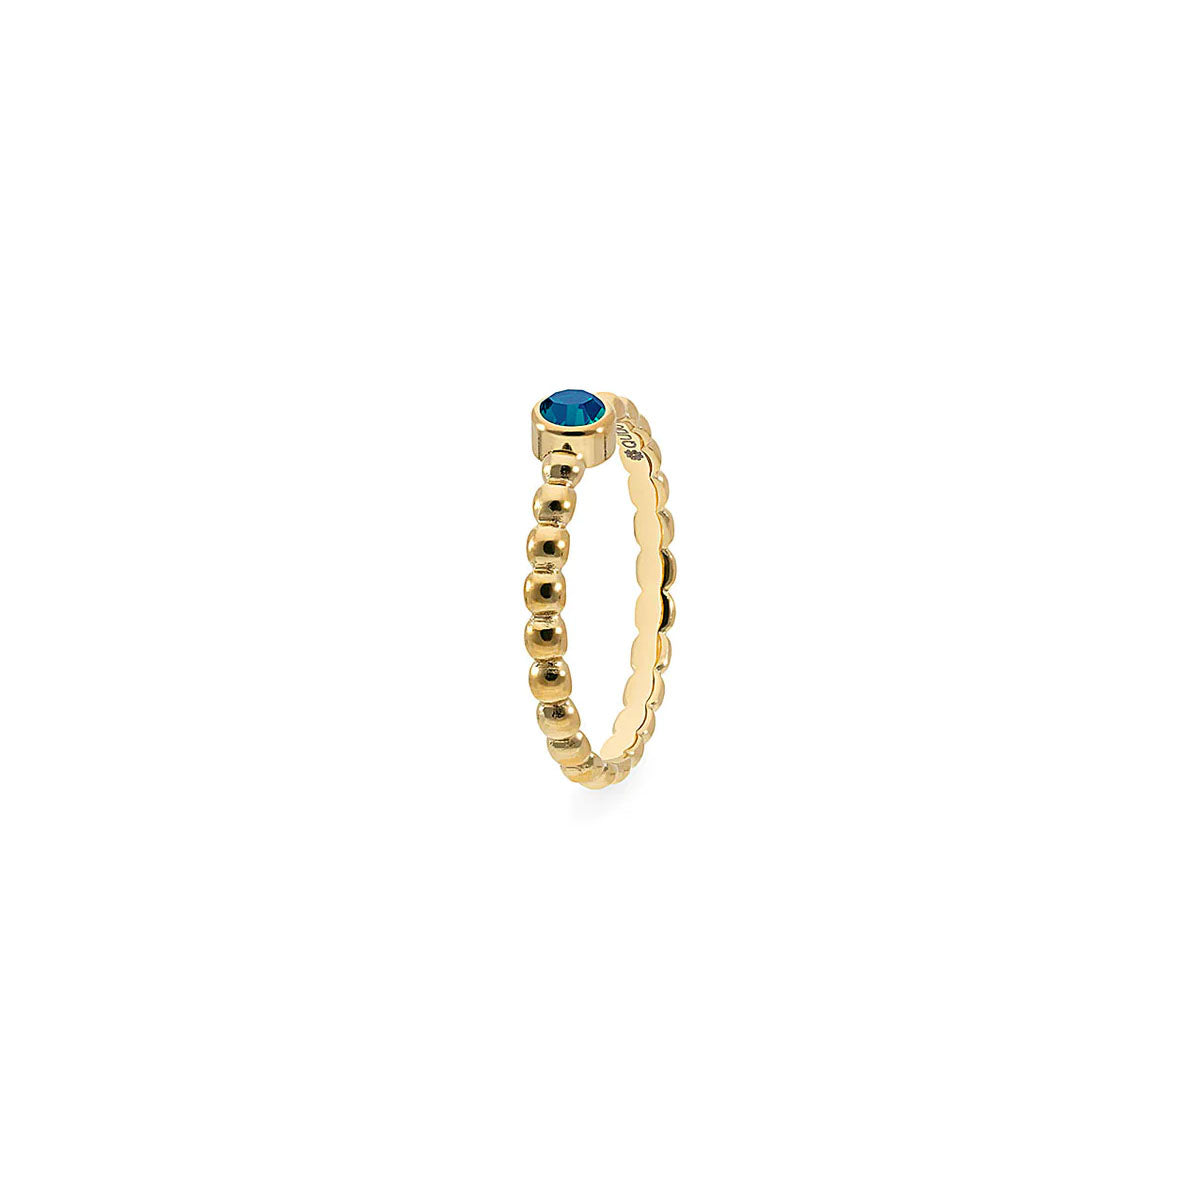 Matino Deluxe Ring in Gold - Denim Blue